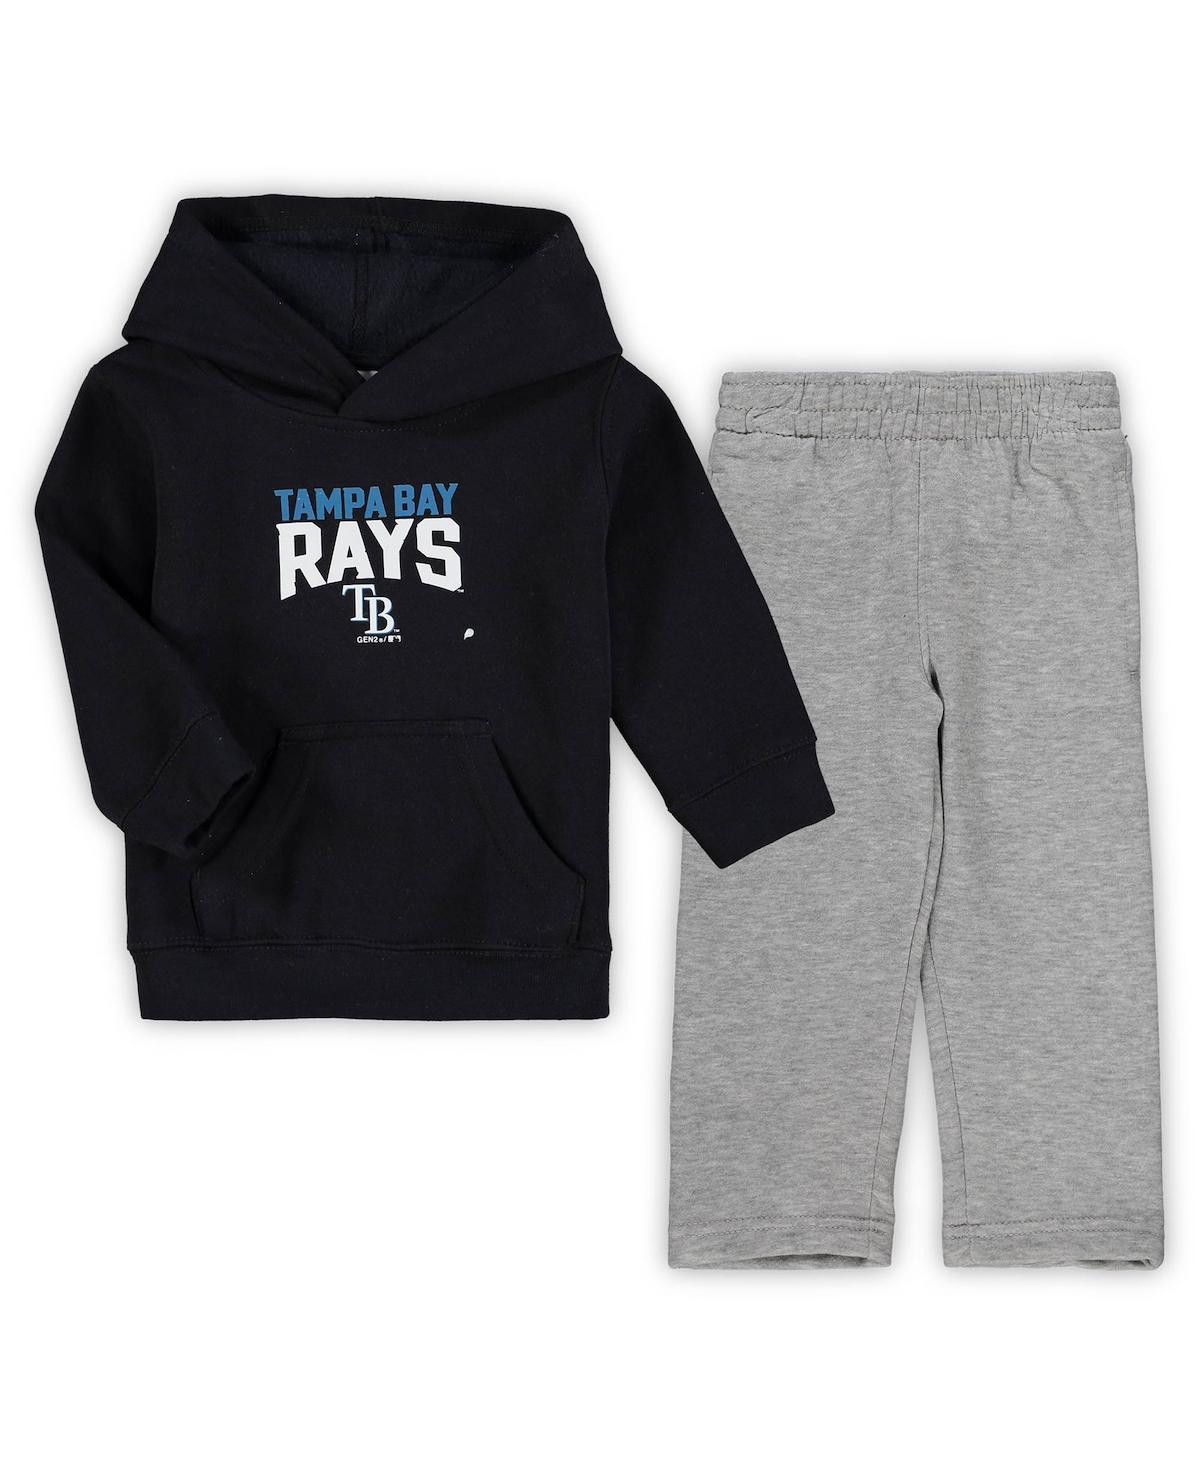 Outerstuff Babies' Toddler Boys Navy, Heather Gray Tampa Bay Rays Fan Flare Fleece Hoodie And Pants Set In Navy,heathered Gray